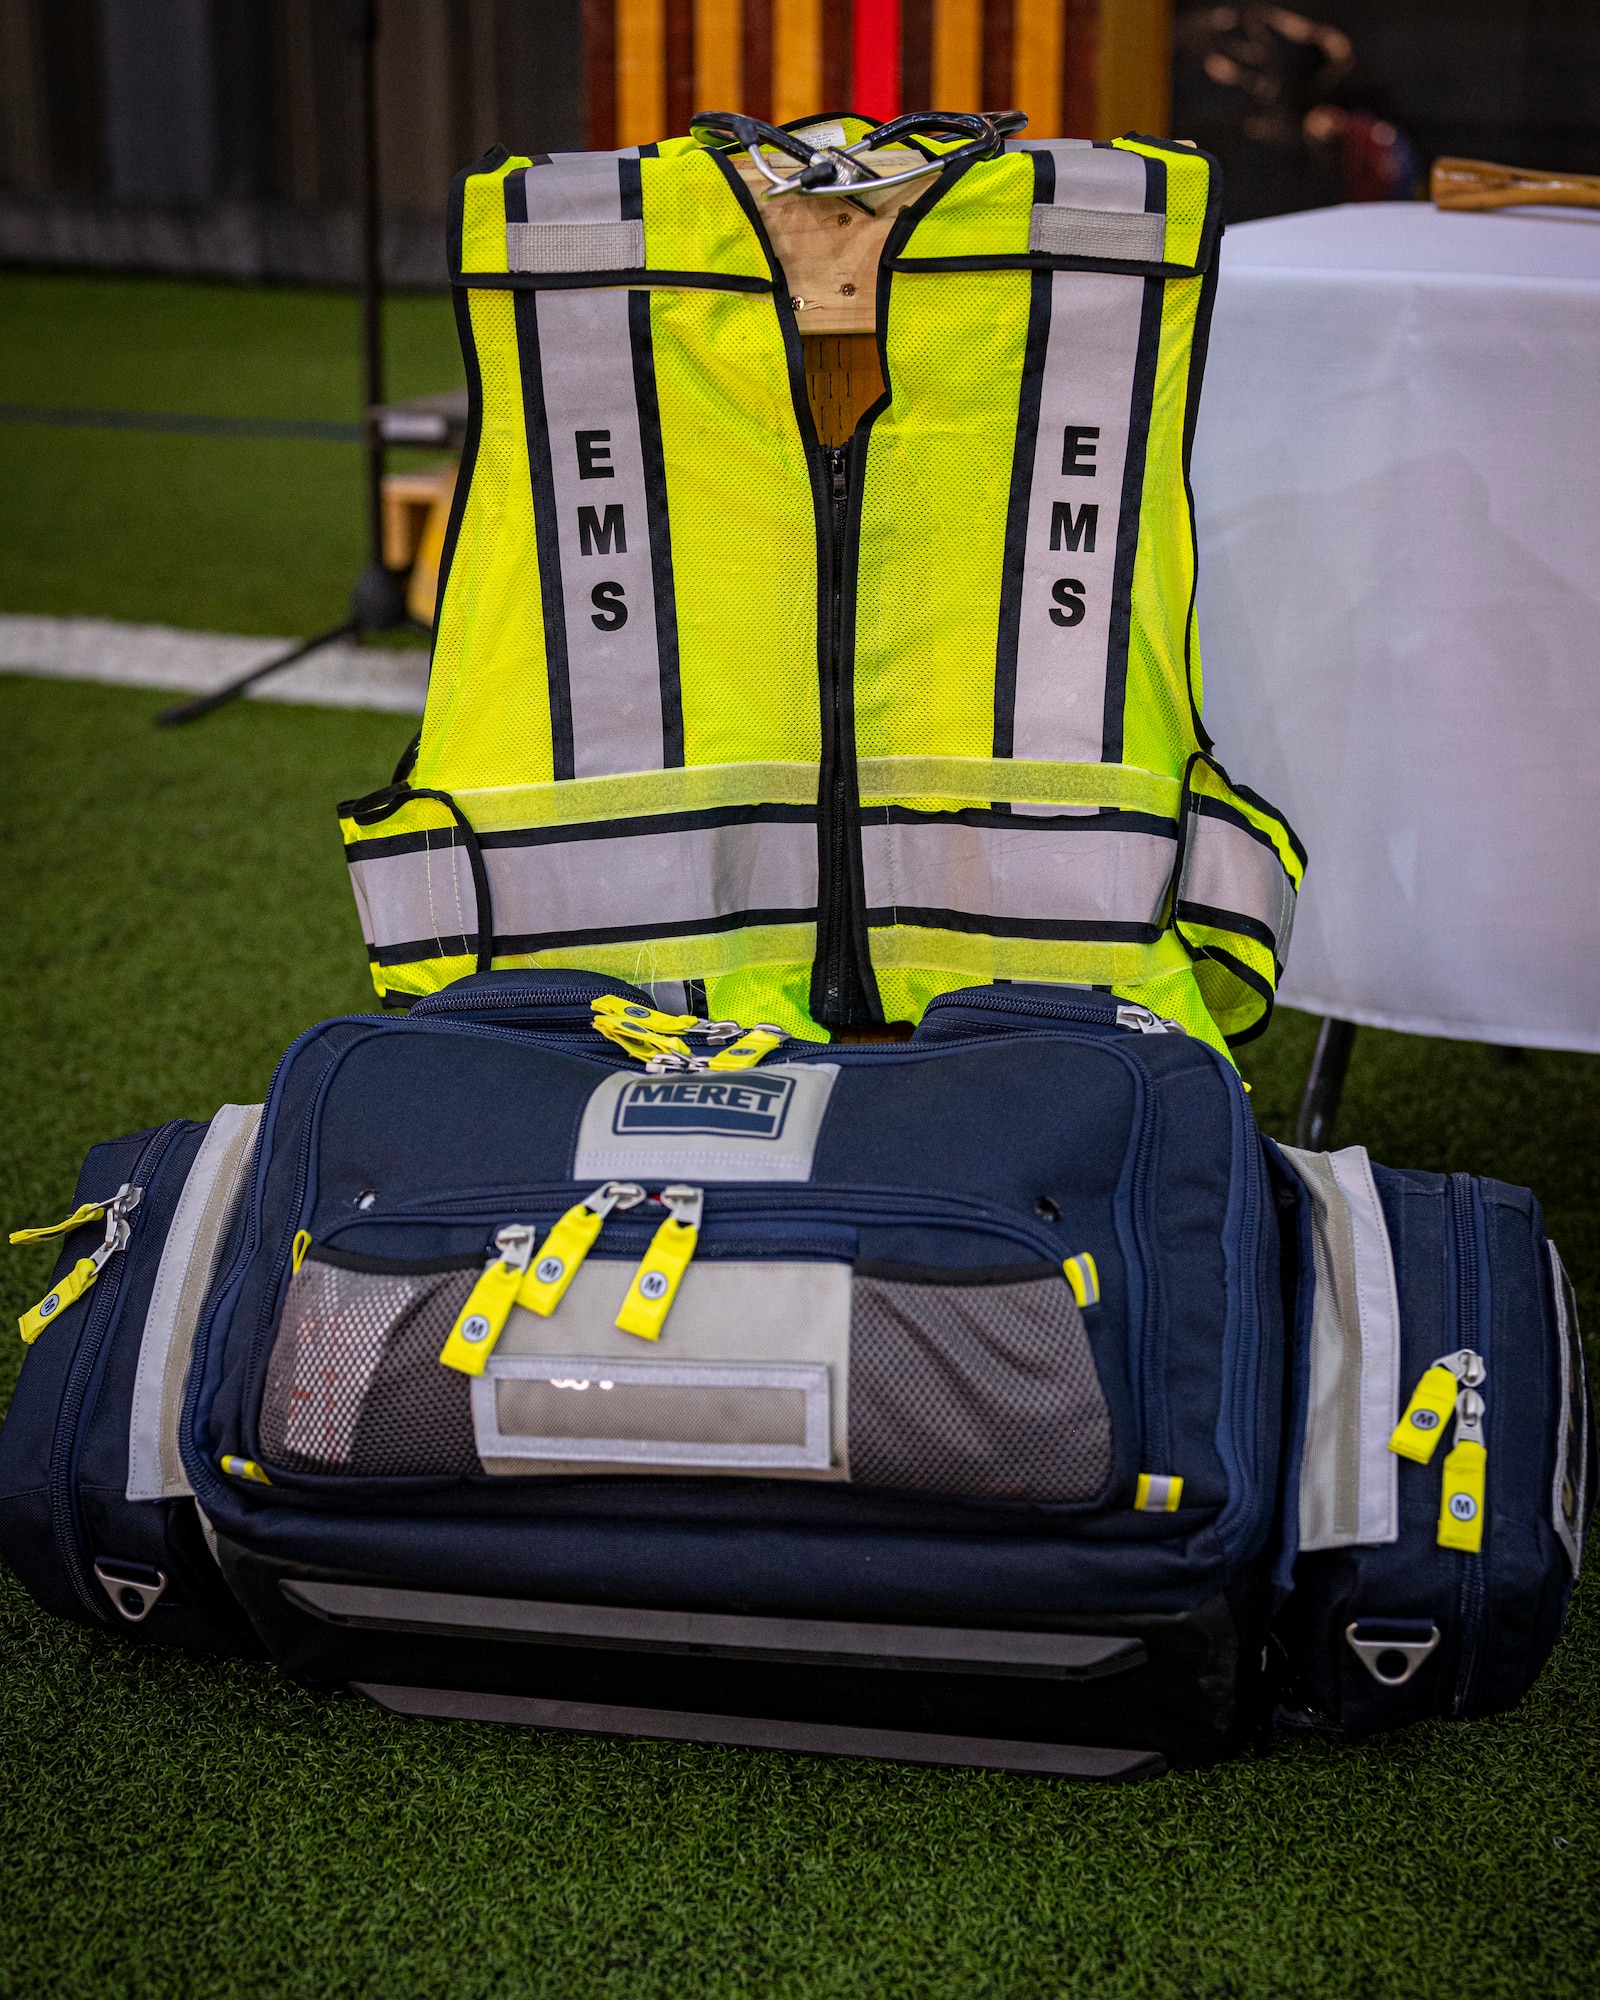 Emergency medical service kit and vest during a ceremony